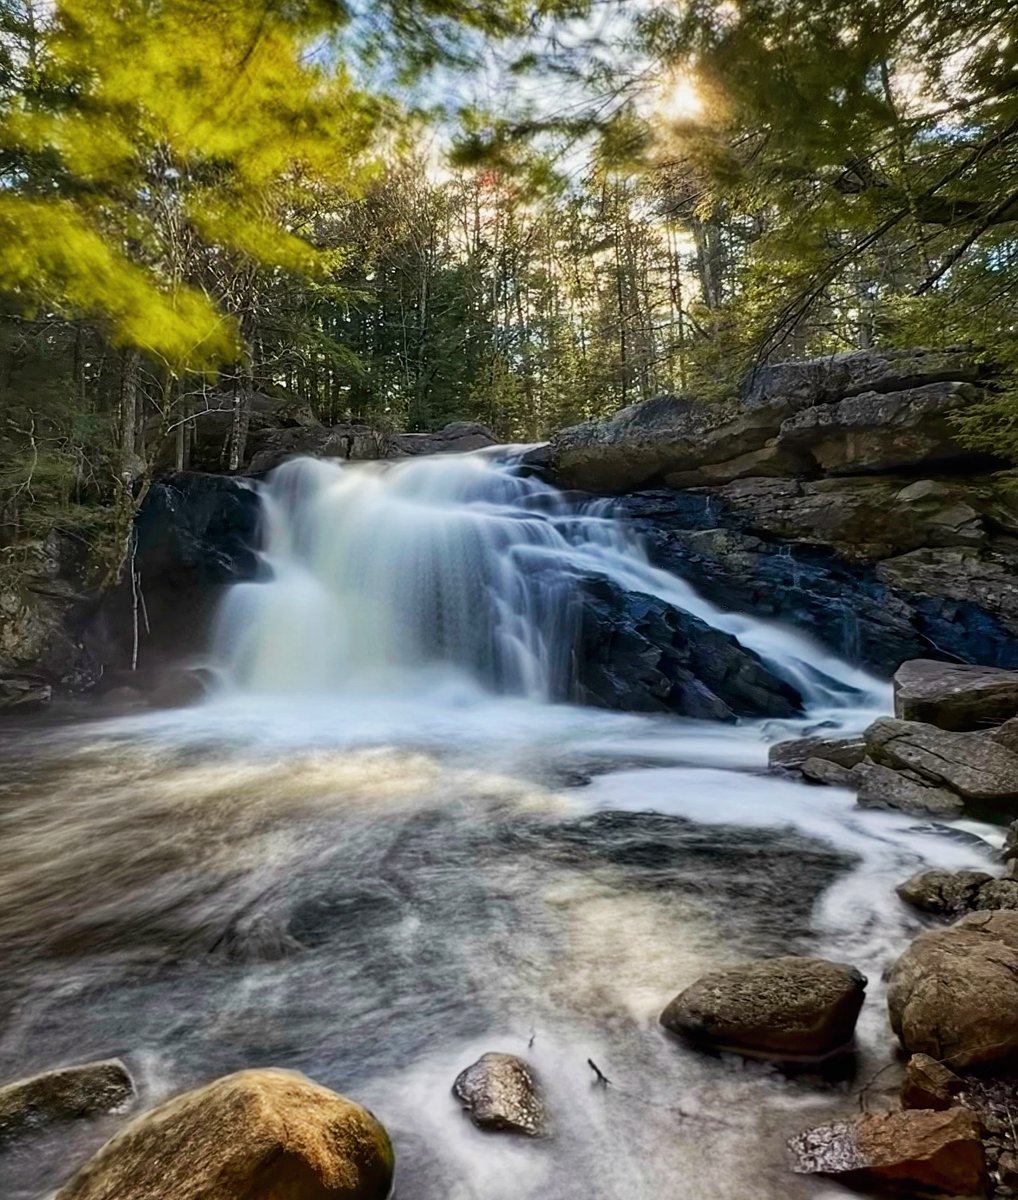 Happy Waterfall Wednesday! What waterfall do you want to go explore? 🏔 💧 #LiveFreeNH PC: @massdaytripping